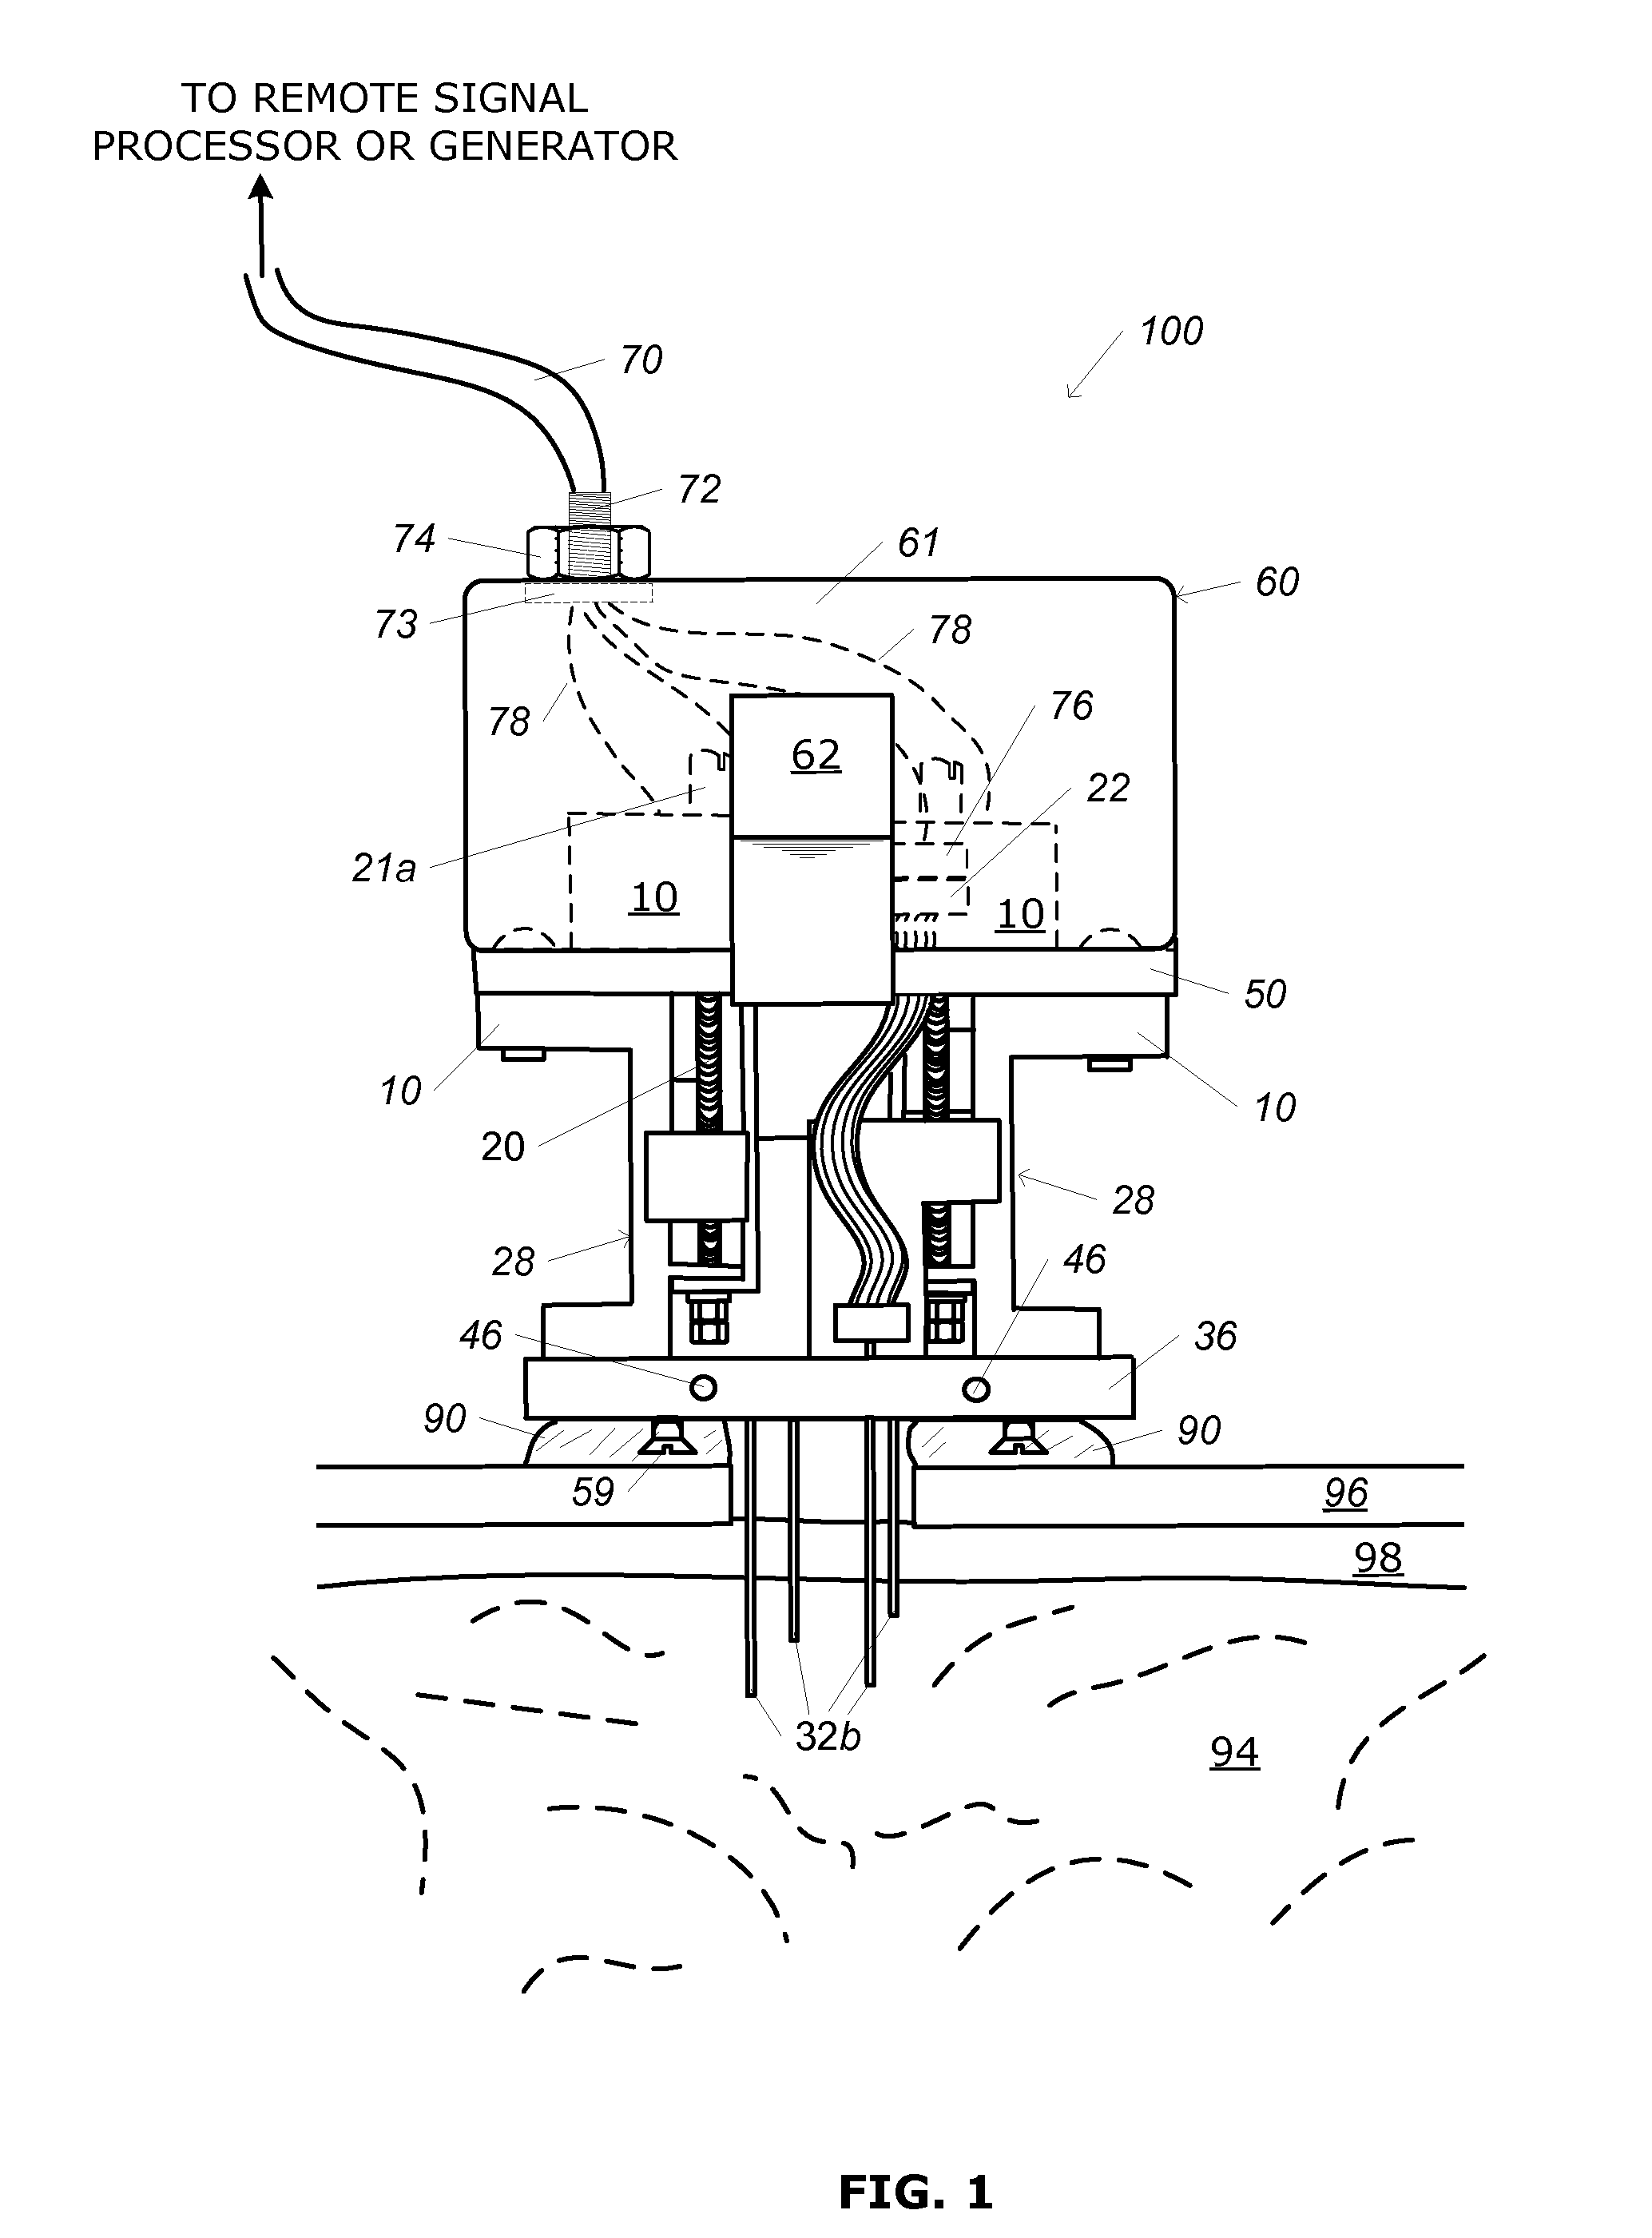 Microdrive and Modular Microdrive Assembly for Positioning Instruments in Animal Bodies